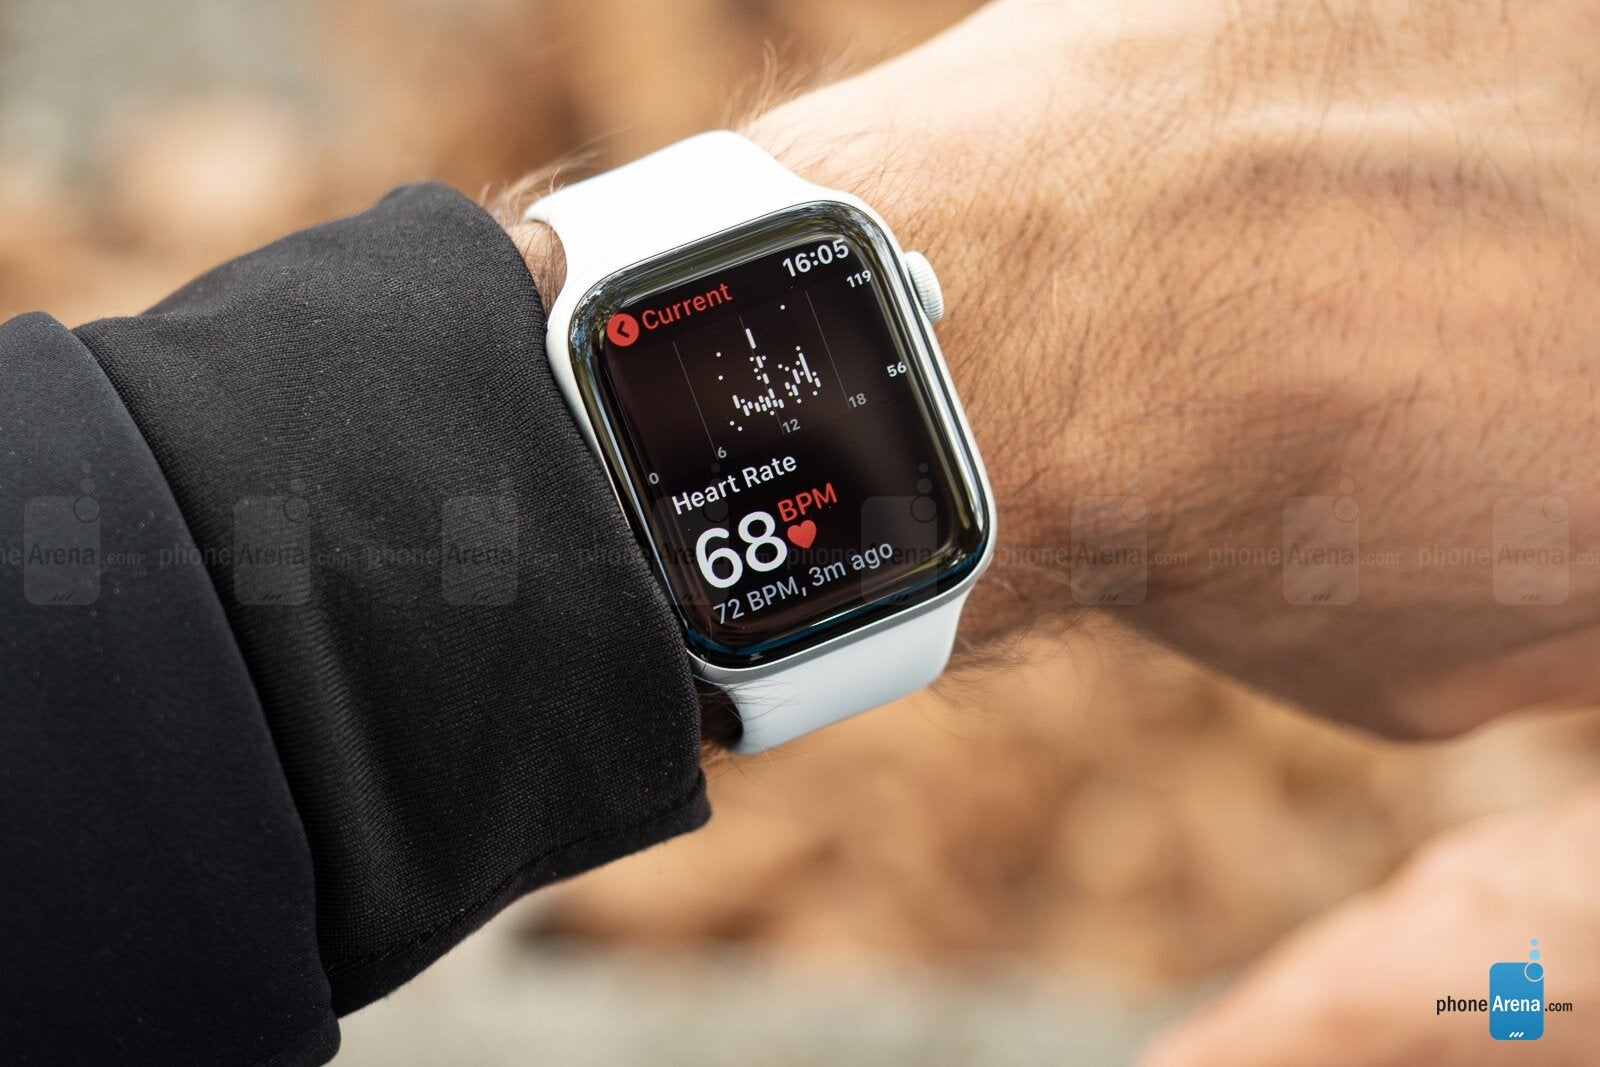 The Apple Watch Series 5 is the best smartwatch money can buy right now - The Apple Watch Series 5 is nothing special, but it still deserves all the attention in the world